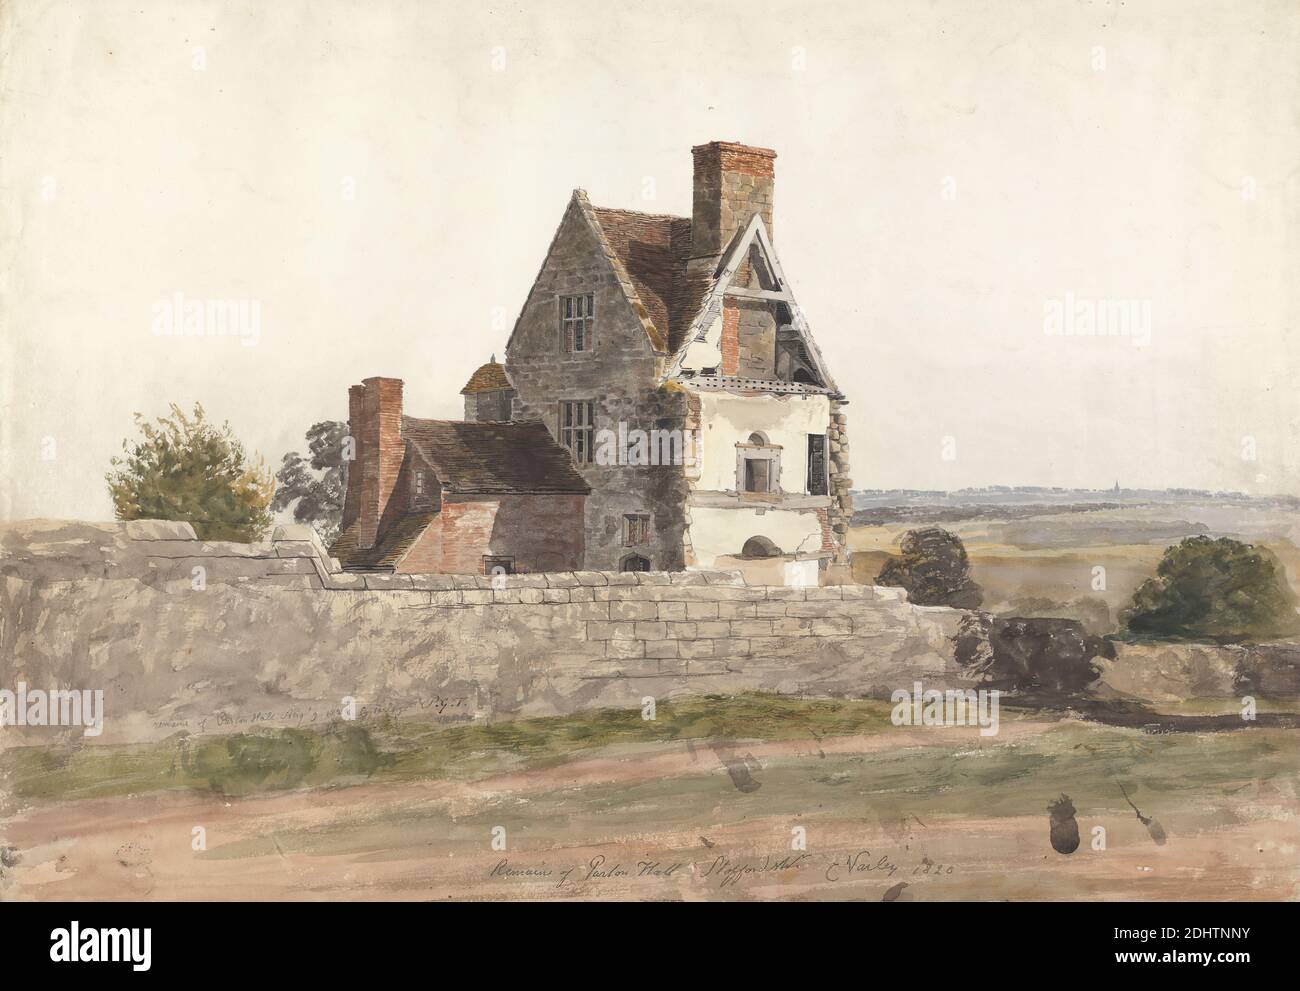 Remains of Purton Hall, Staffordshire, Cornelius Varley, 1781–1873, British, 1820, Watercolor, graphite, and black ink on medium, slightly textured, cream wove paper, Sheet: 14 7/8 × 21 3/8 inches (37.8 × 54.3 cm), architectural subject, chimneys, grass, road, ruins, trees, England, Europe, Staffordshire, United Kingdom Stock Photo